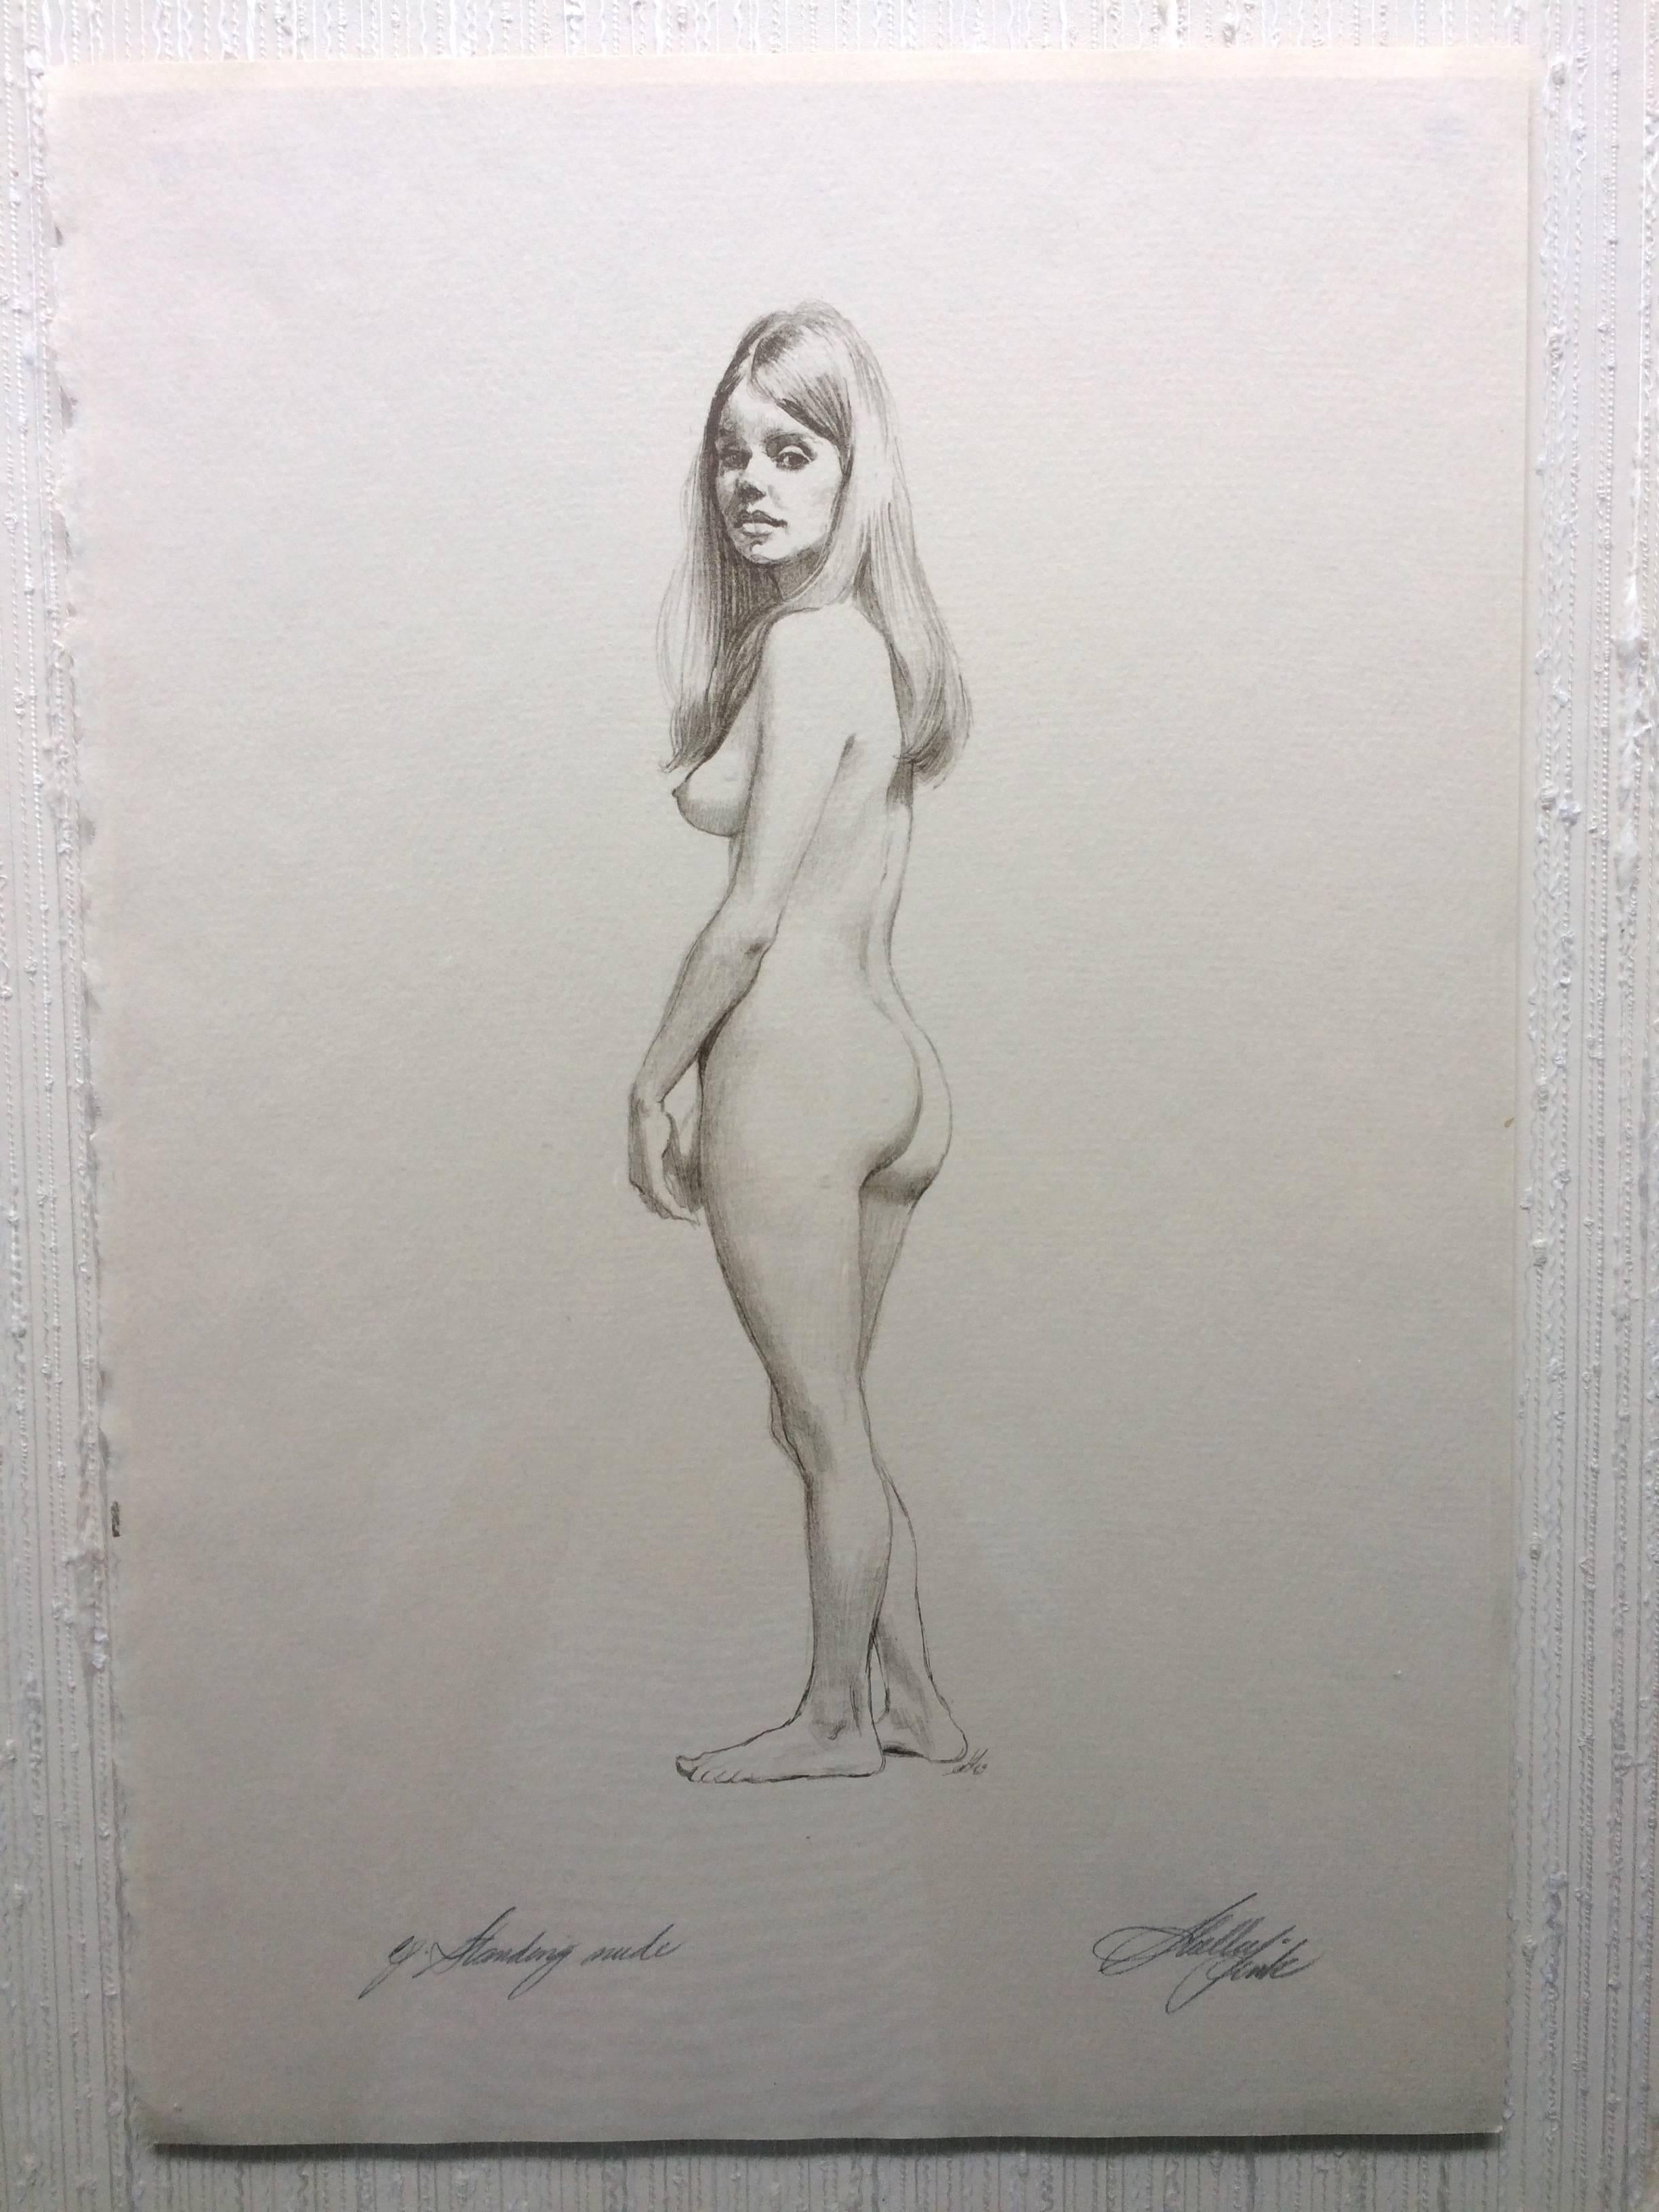  Standing Nude Pencil Drawing  - Art by Sheldon Shelly Fink